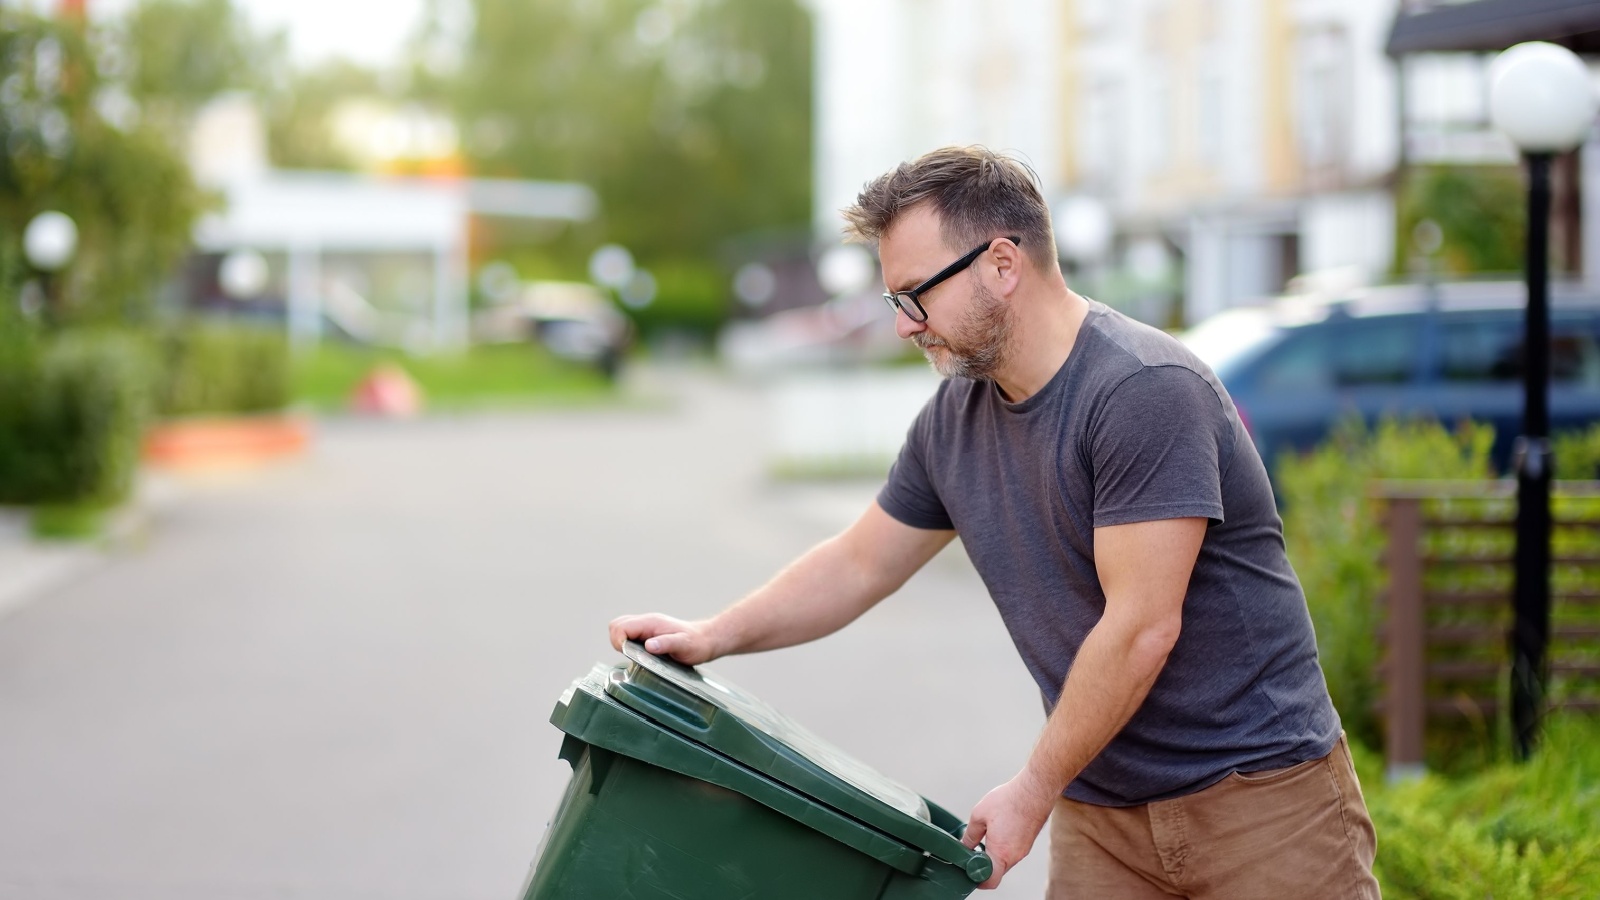 man pulling out a large green plastic garbage container in front of the townhouse to the roadway of the street. Garbage collection and recycling trash, the zero waste concept. Waste managment